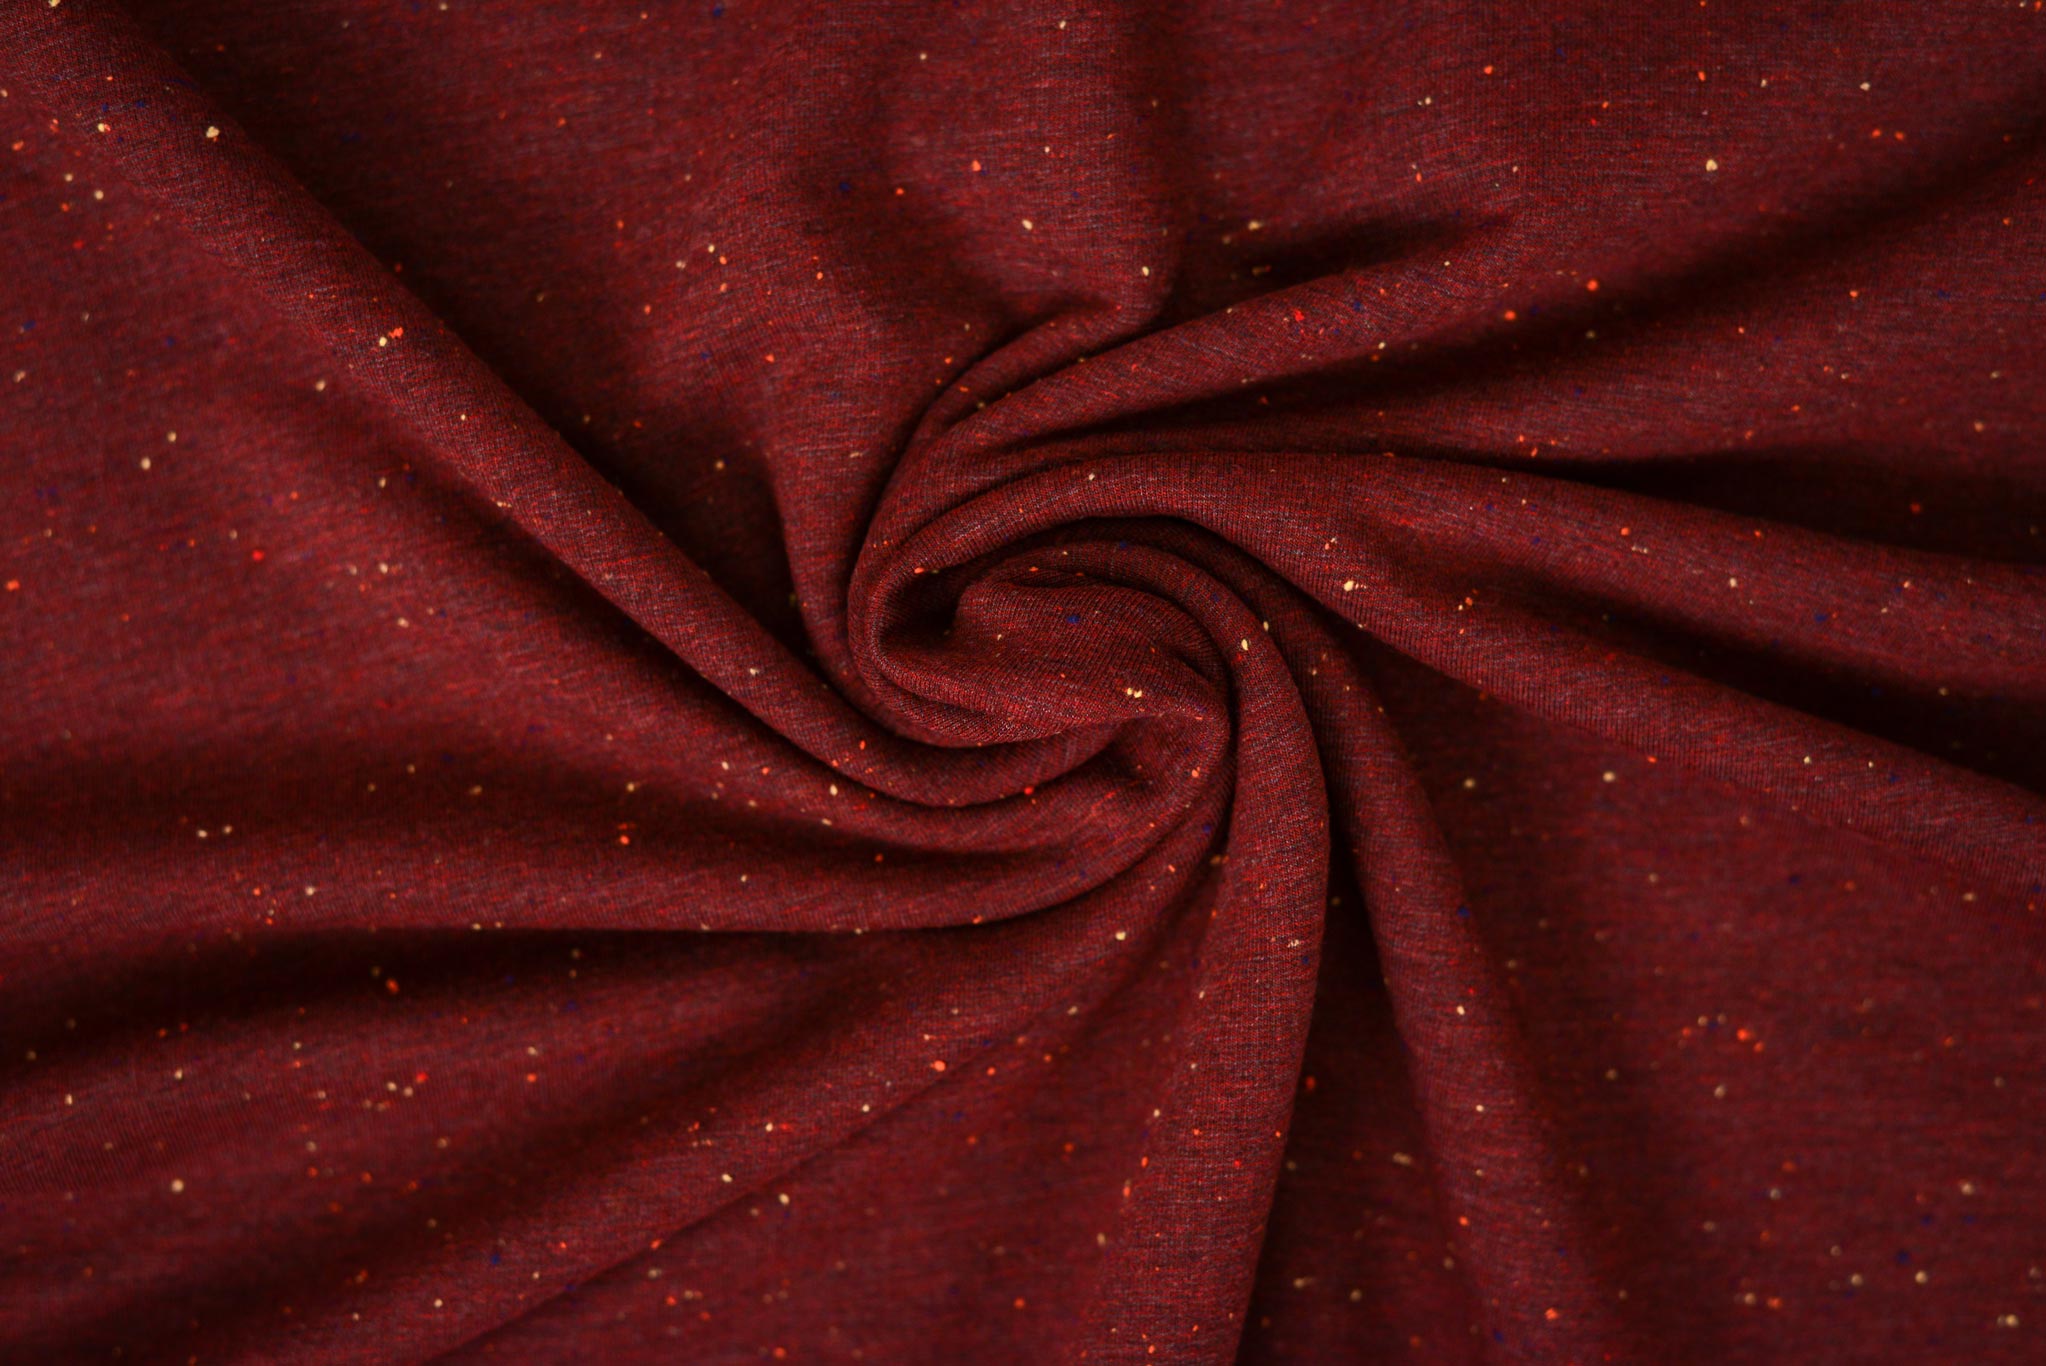 Noppy-Mélange French Terry Confetti rot 0,5 m